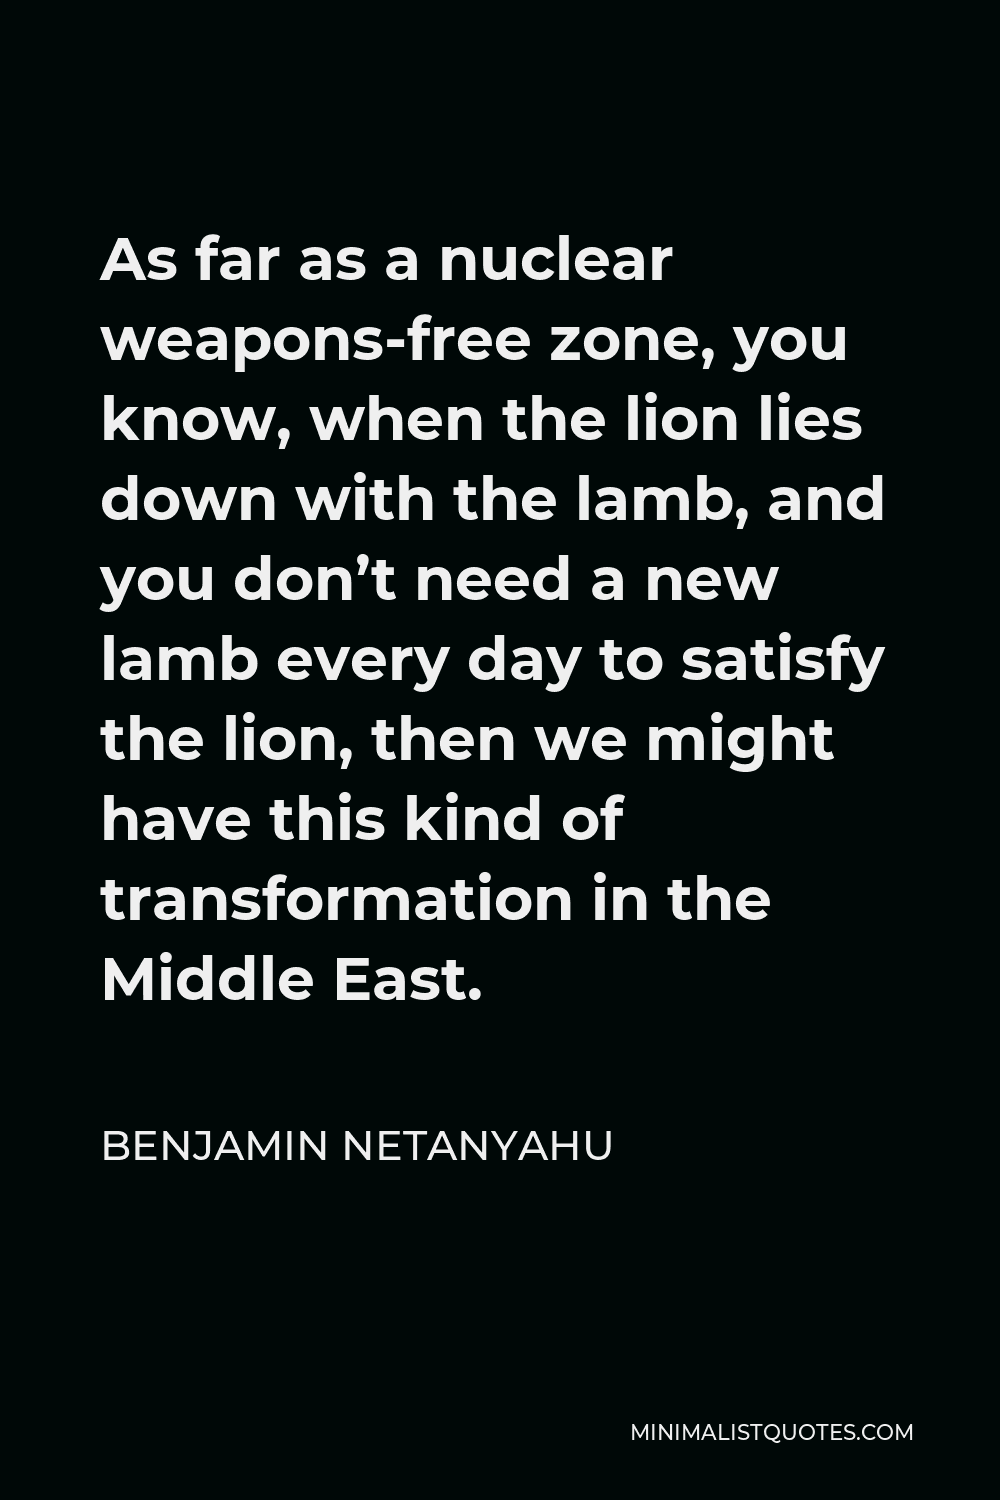 Benjamin Netanyahu Quote - As far as a nuclear weapons-free zone, you know, when the lion lies down with the lamb, and you don’t need a new lamb every day to satisfy the lion, then we might have this kind of transformation in the Middle East.